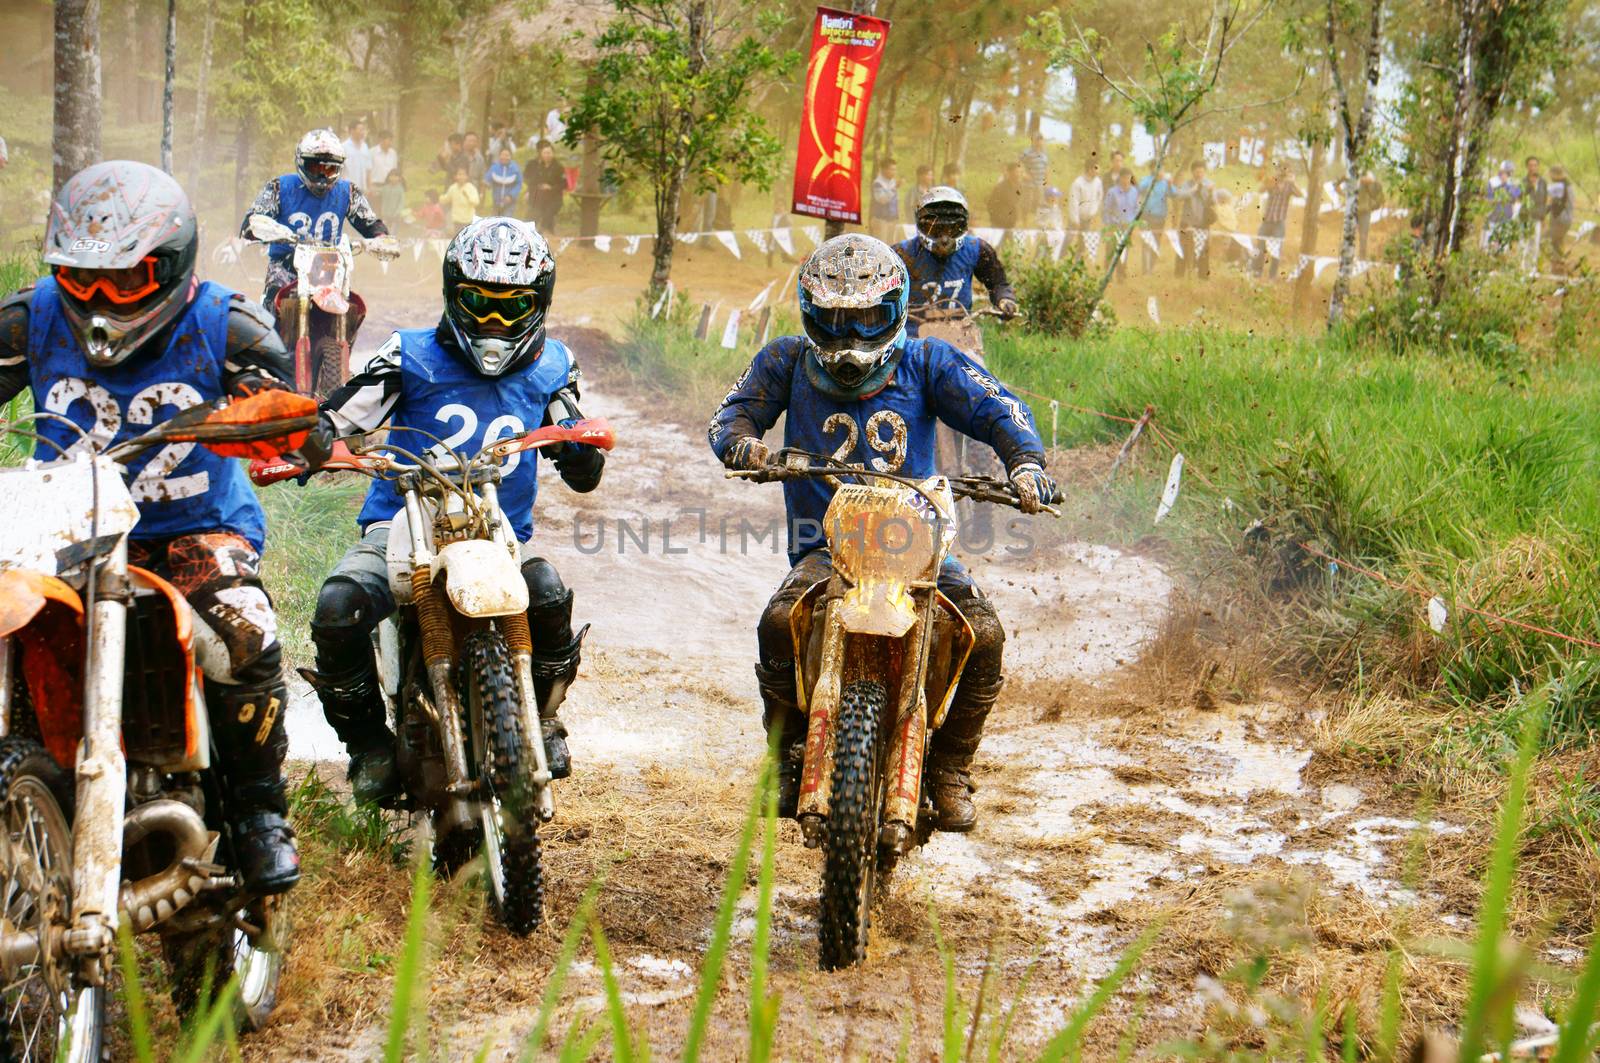 BAO LOC, VIET NAM- DECEMBER 23: Racer in activity at motorcycle race hole on Bao Loc, Viet Nam, they try to across a marshy stretch of road with violent competition in December 23, 2012                